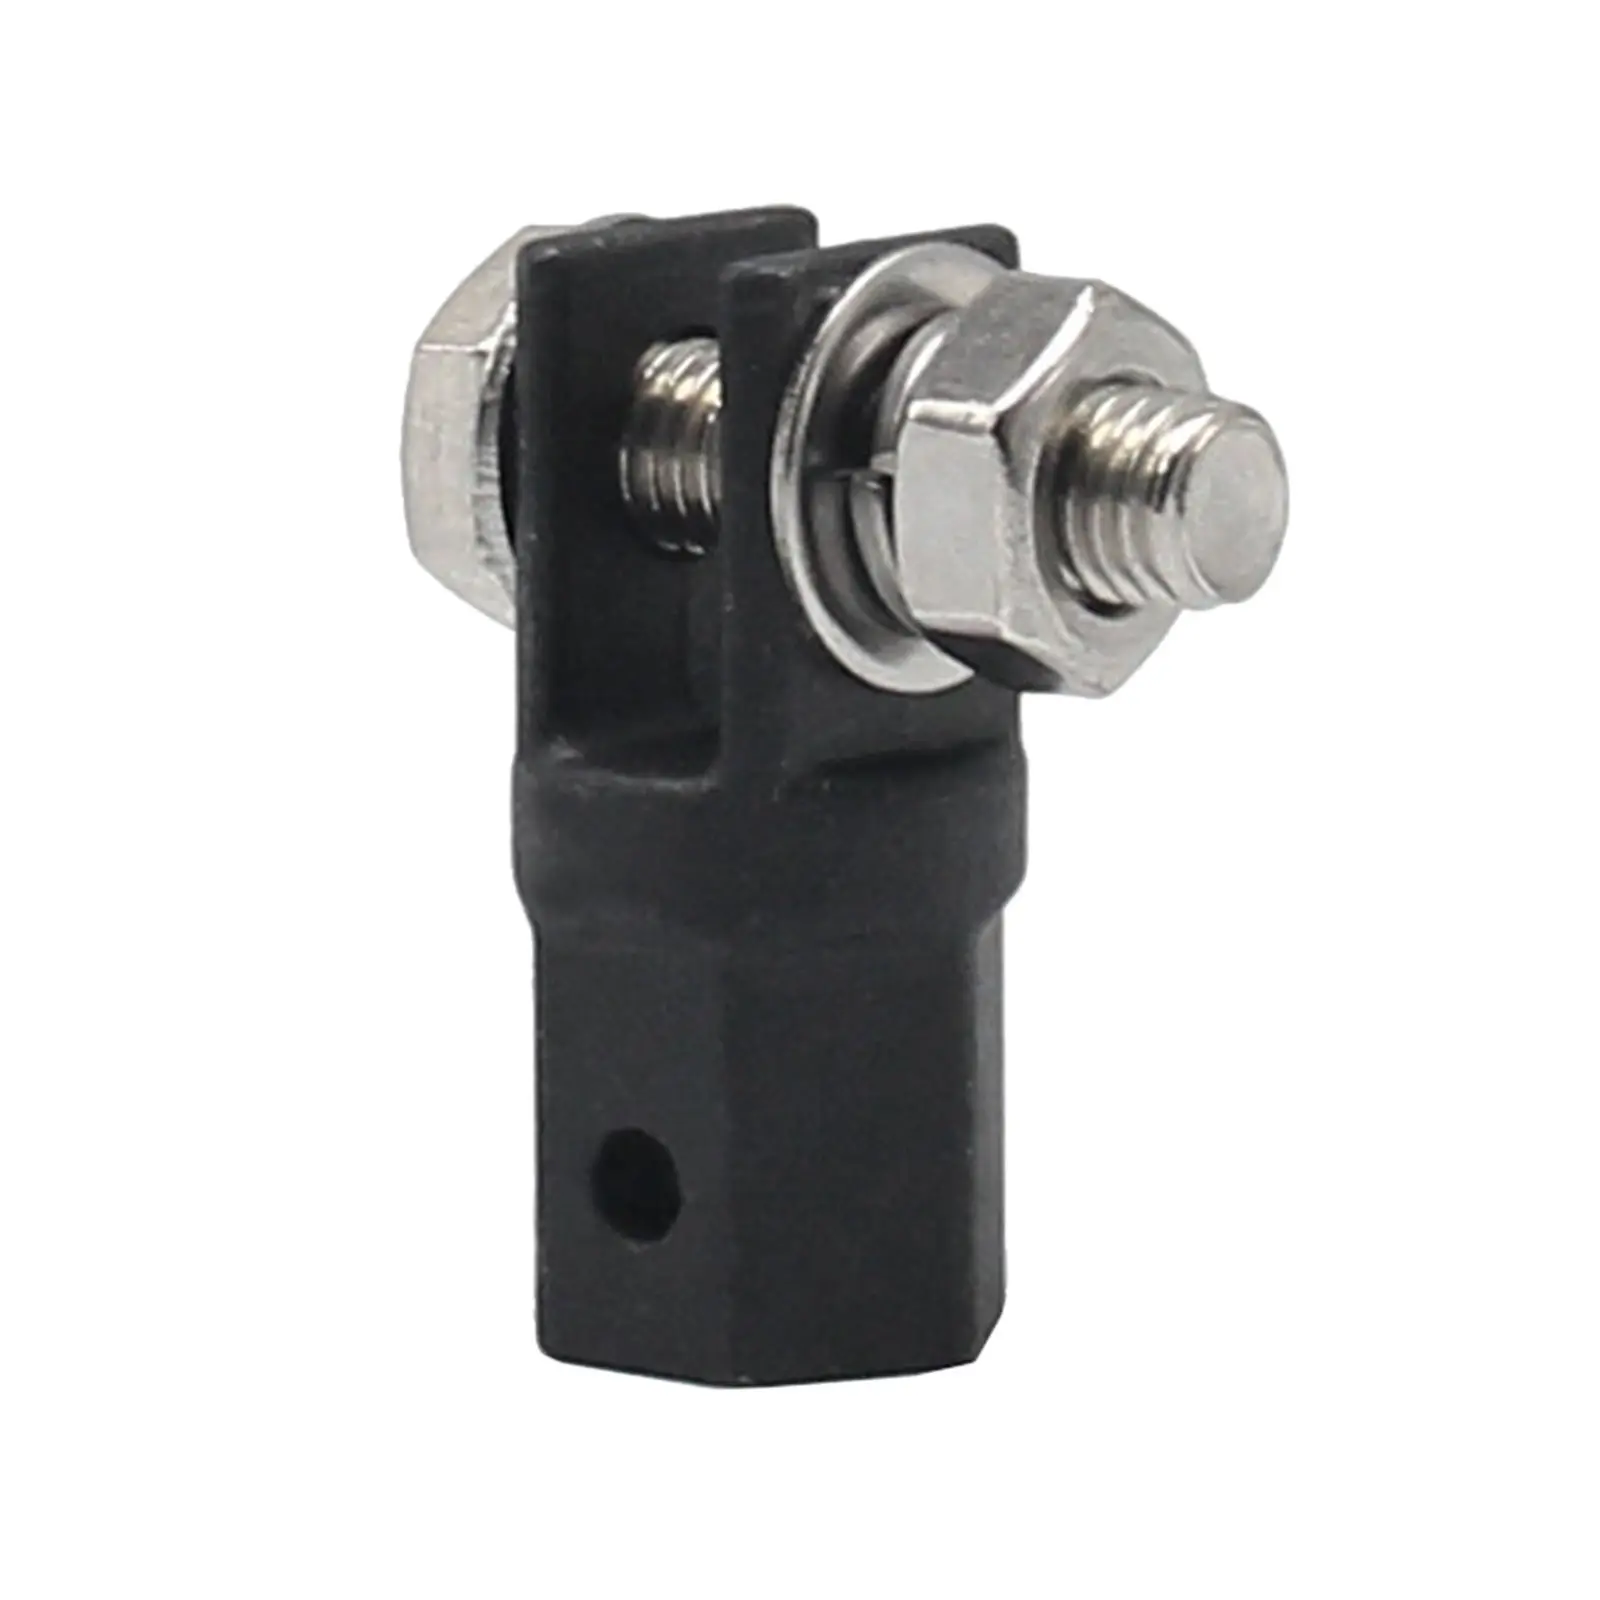 Scissor Jack Adaptor 1/2'' for Use with 1/2 Inch Drive or Impact Wrench Tools